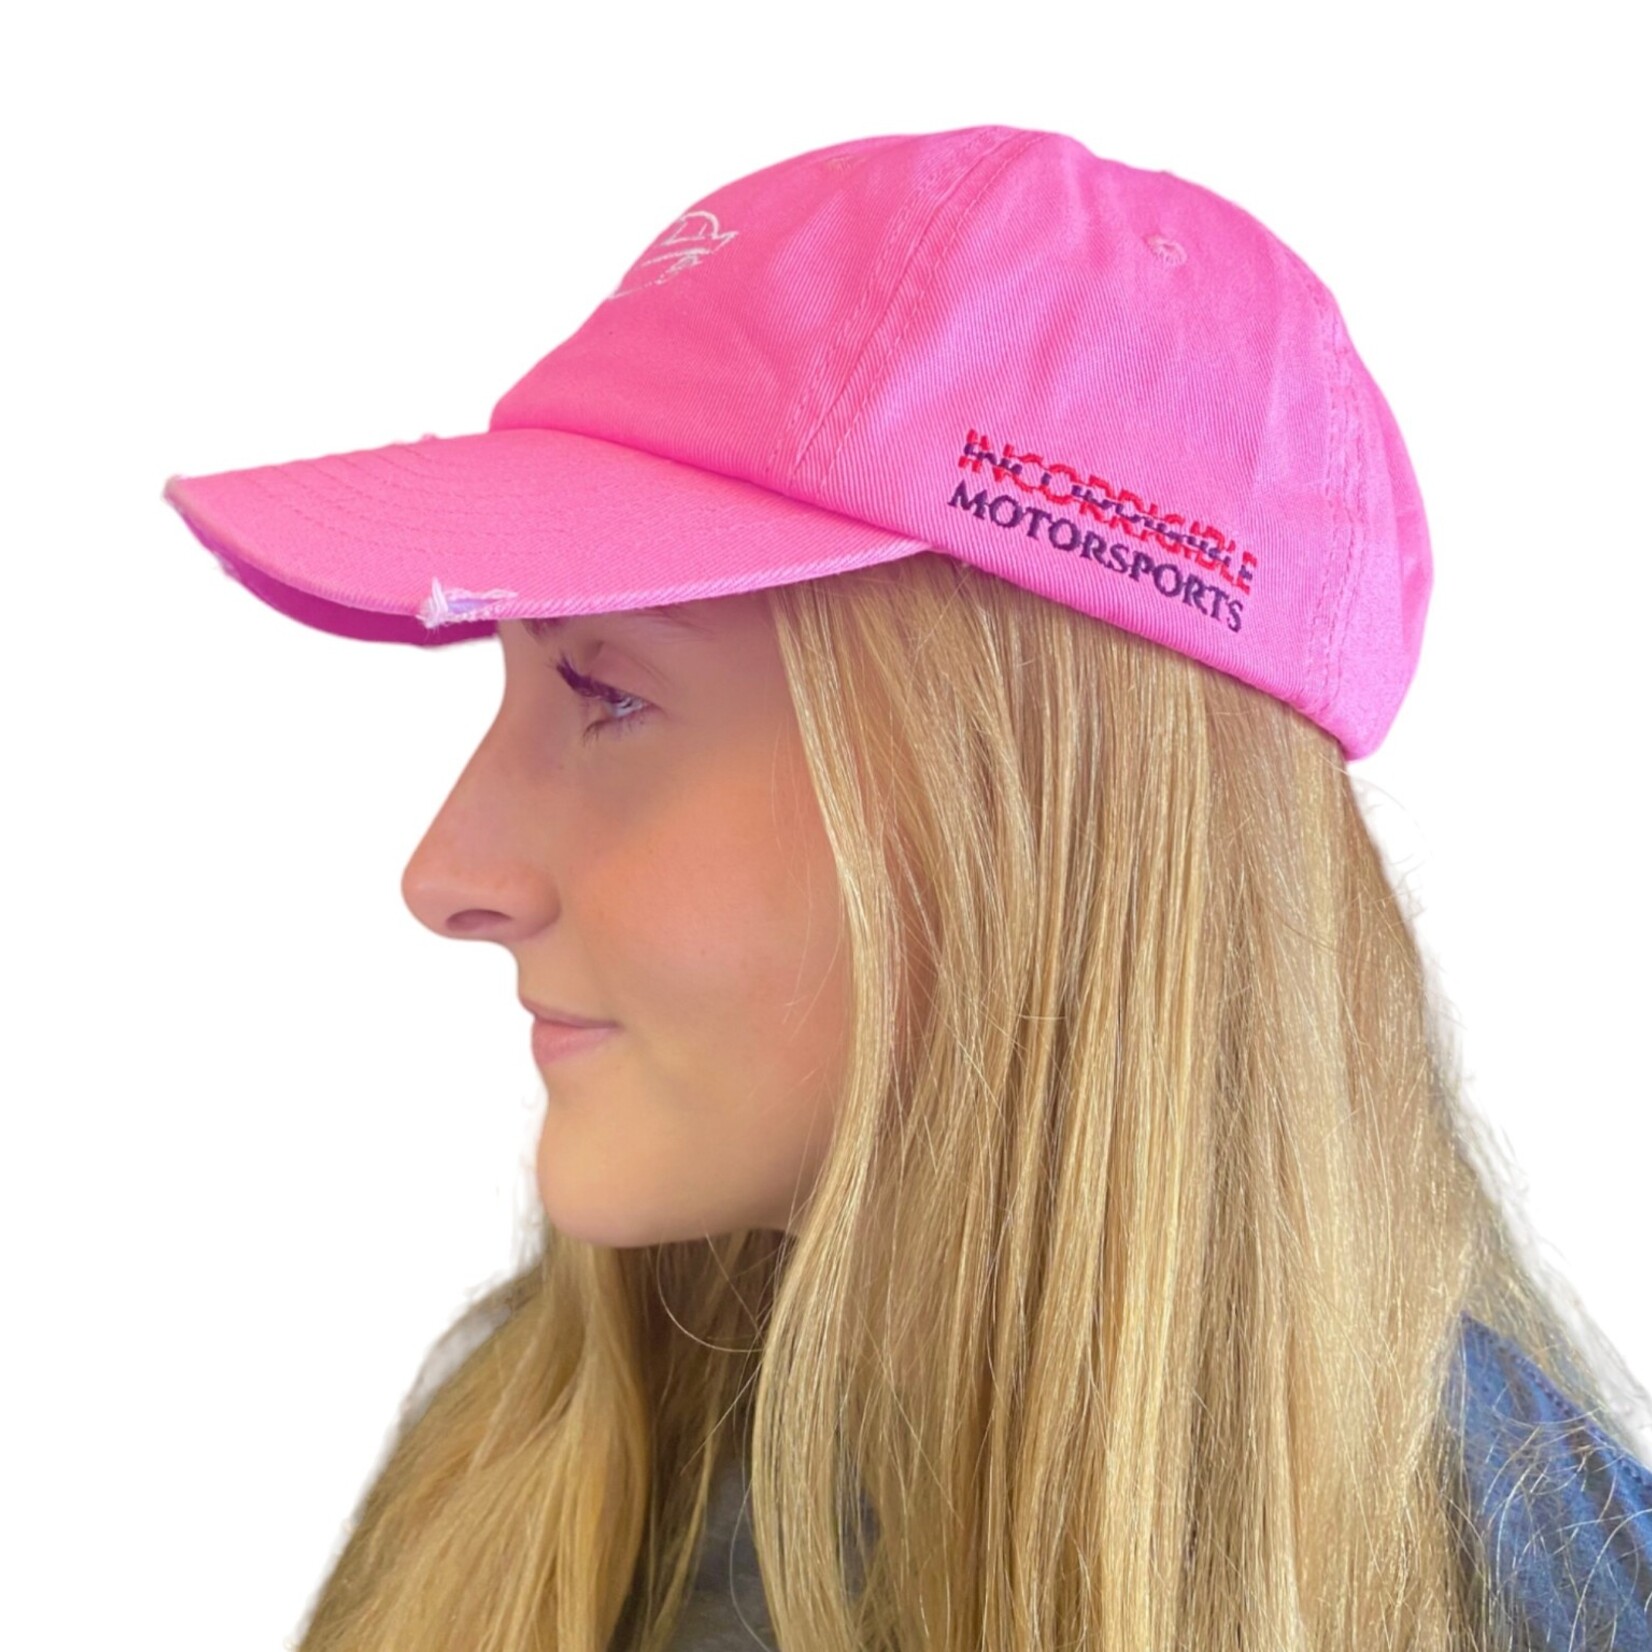 INCORRIGIBLE MOTORSPORTS "JANKY" RACE CAR HAT WOMENS EMBROIDERED 6 PANEL UNSTRUCTURED DISTRESSED SNAP BACK